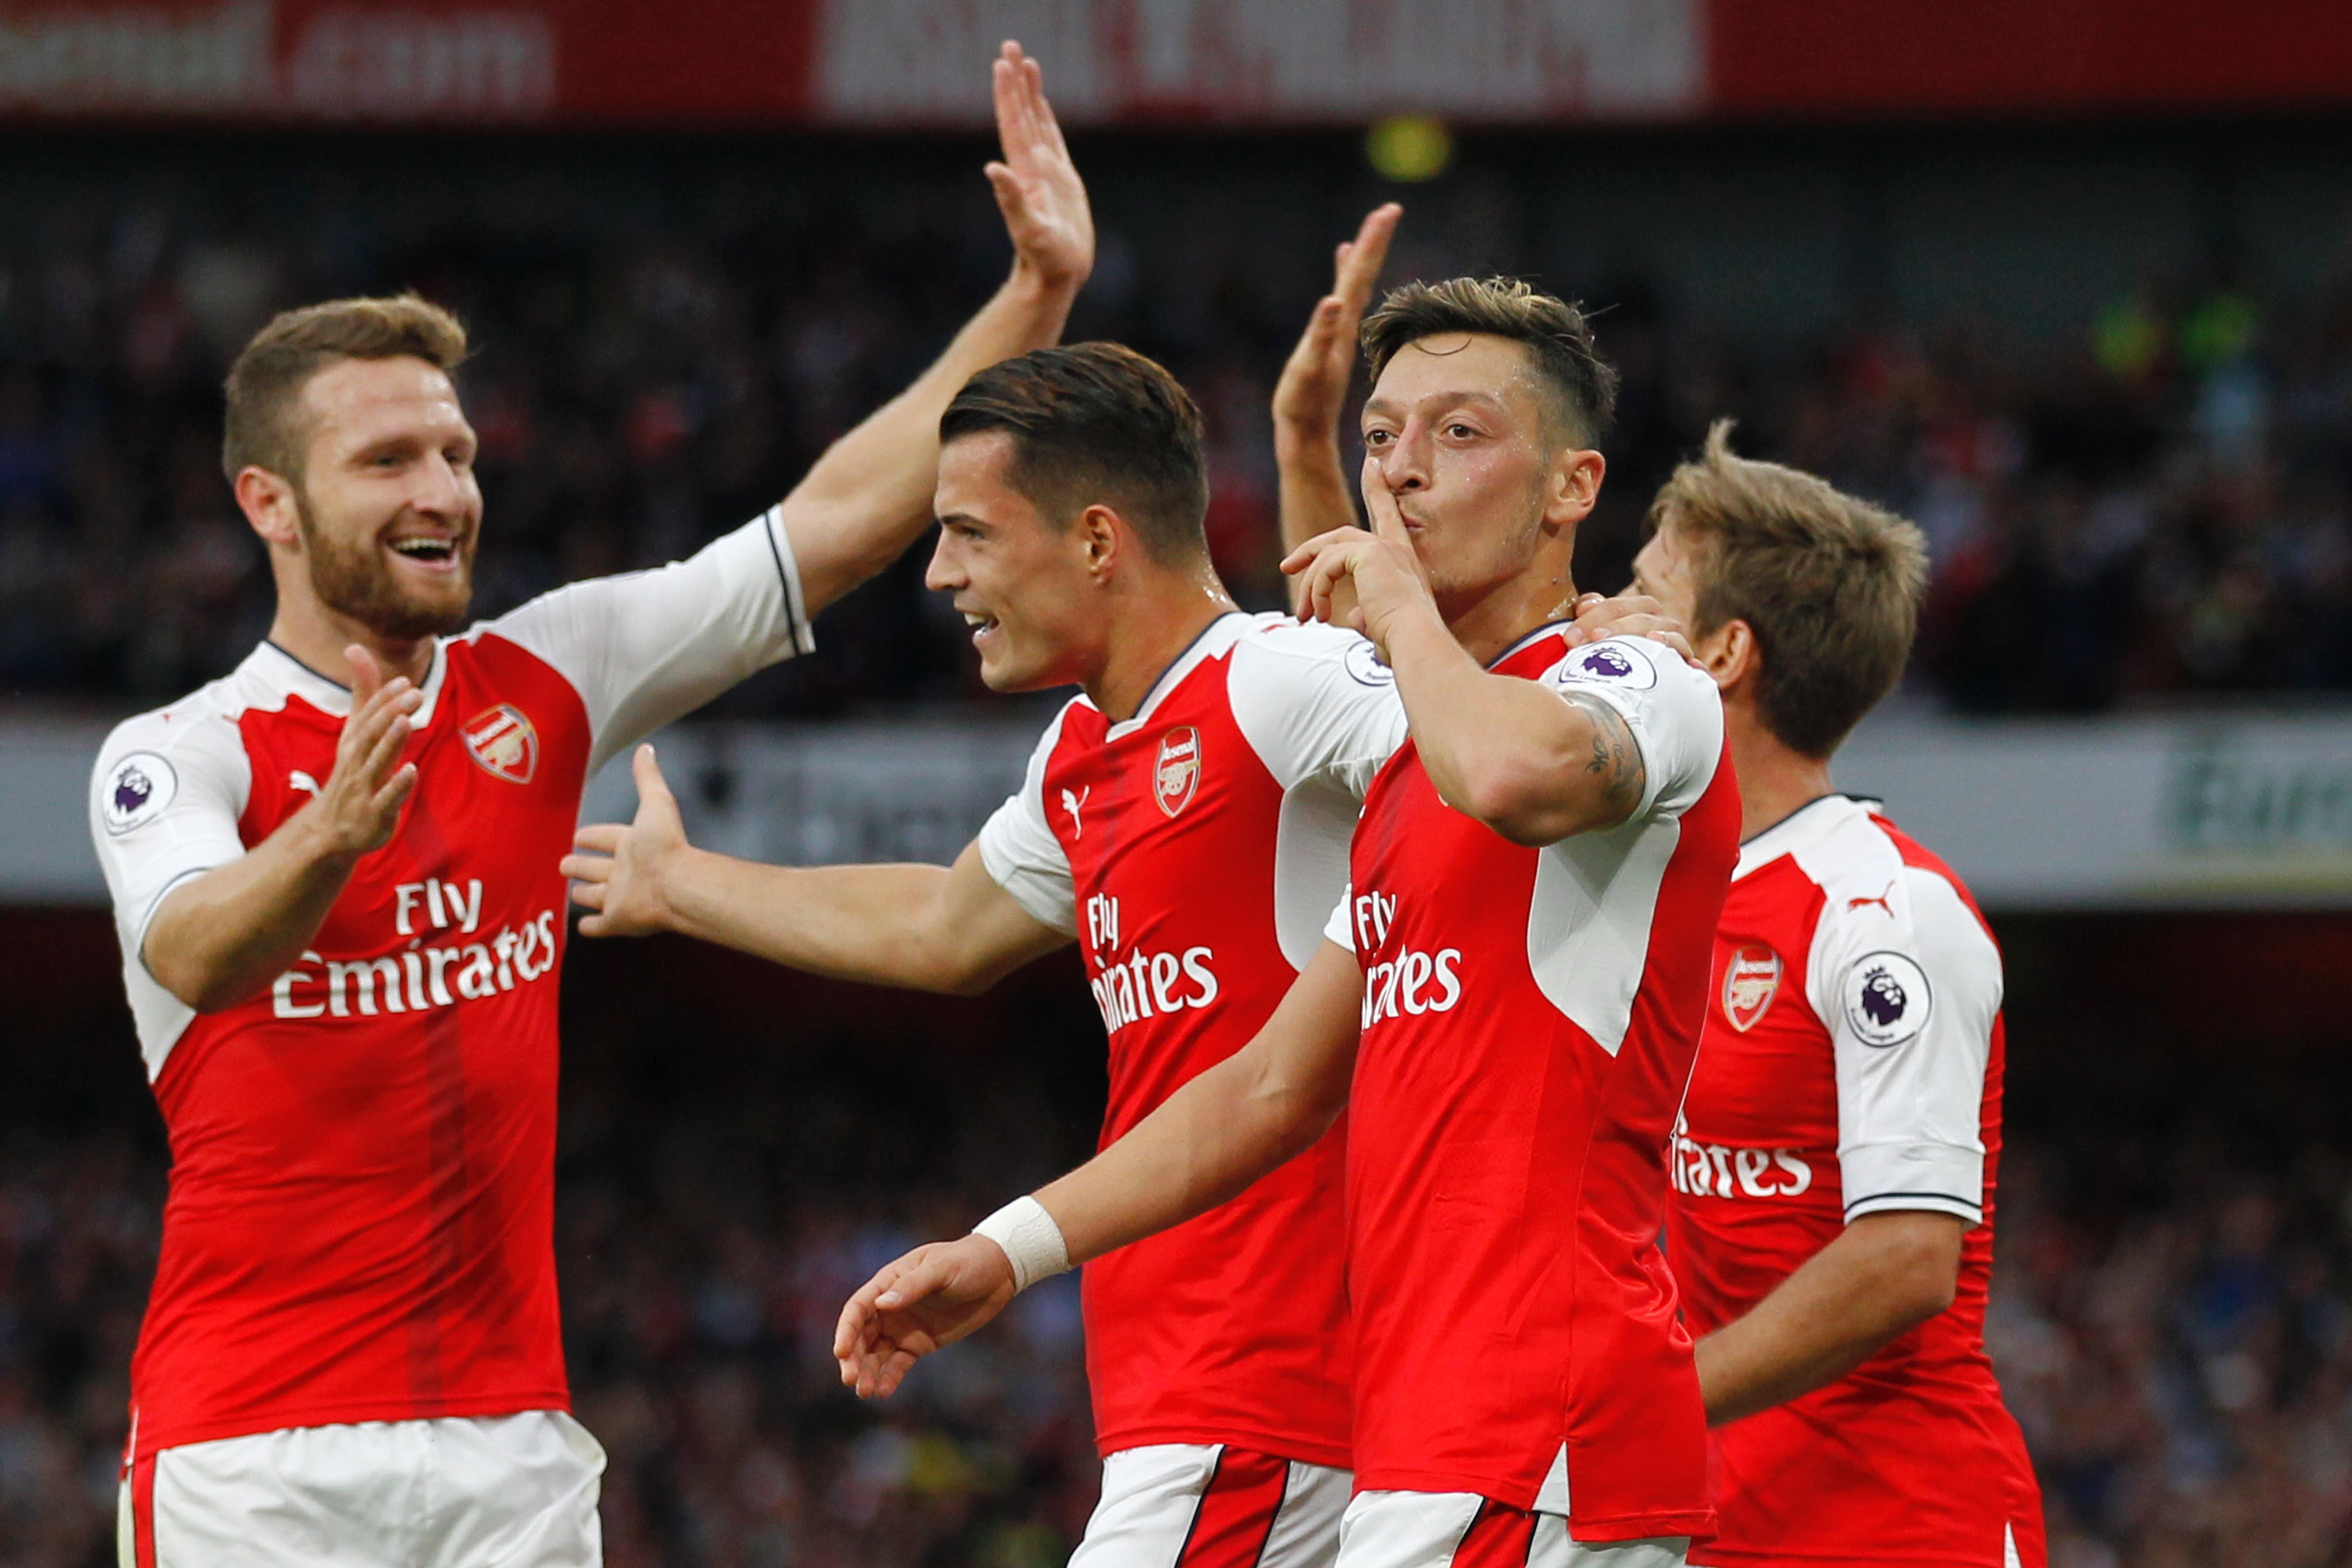 Arsenal's German midfielder Mesut Ozil celebrates scoring their third goal during the English Premier League football match between Arsenal and Chelsea at The Emirates stadium in London, on September 24, 2016. / AFP / IKIMAGES / Ian KINGTON / RESTRICTED TO EDITORIAL USE. No use with unauthorized audio, video, data, fixture lists, club/league logos or 'live' services. Online in-match use limited to 45 images, no video emulation. No use in betting, games or single club/league/player publications.        (Photo credit should read IAN KINGTON/AFP/Getty Images)